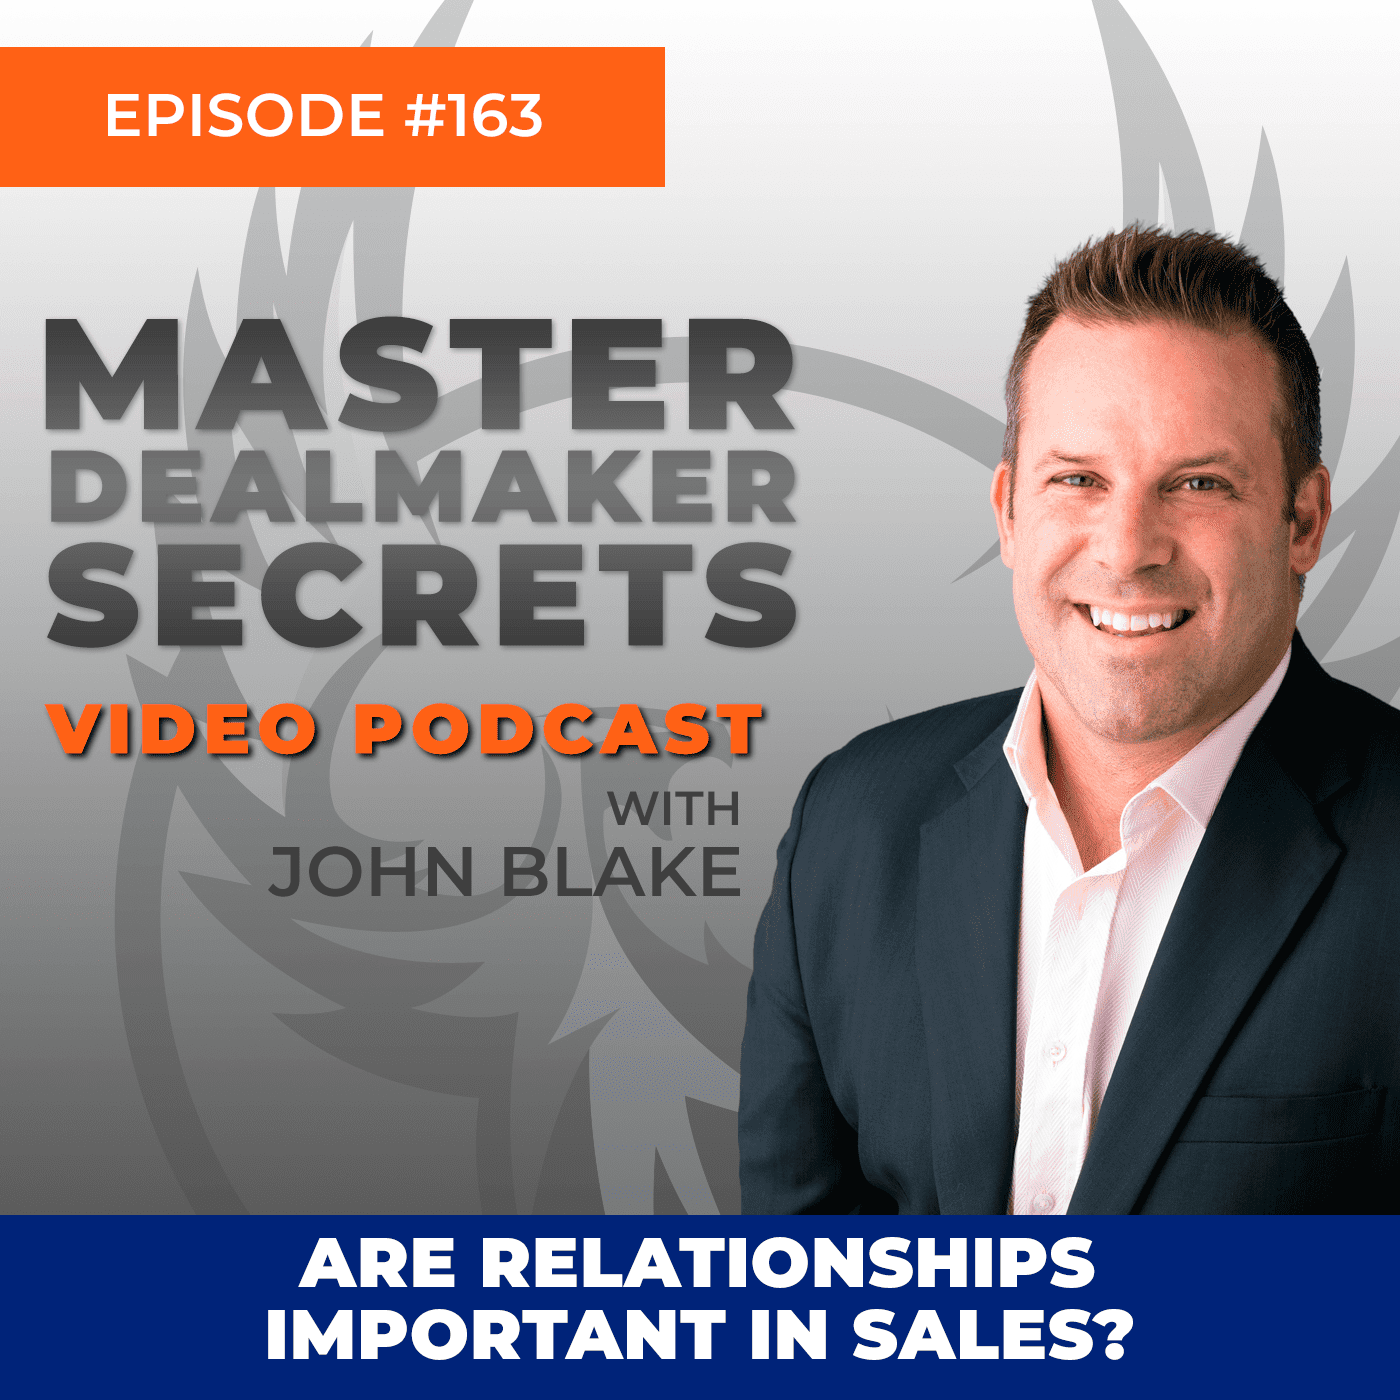 Episode One Hundred Sixty Three 'ARE RELATIONSHIPS IMPORTANT IN SALES?' Video Podcast with John Blake.